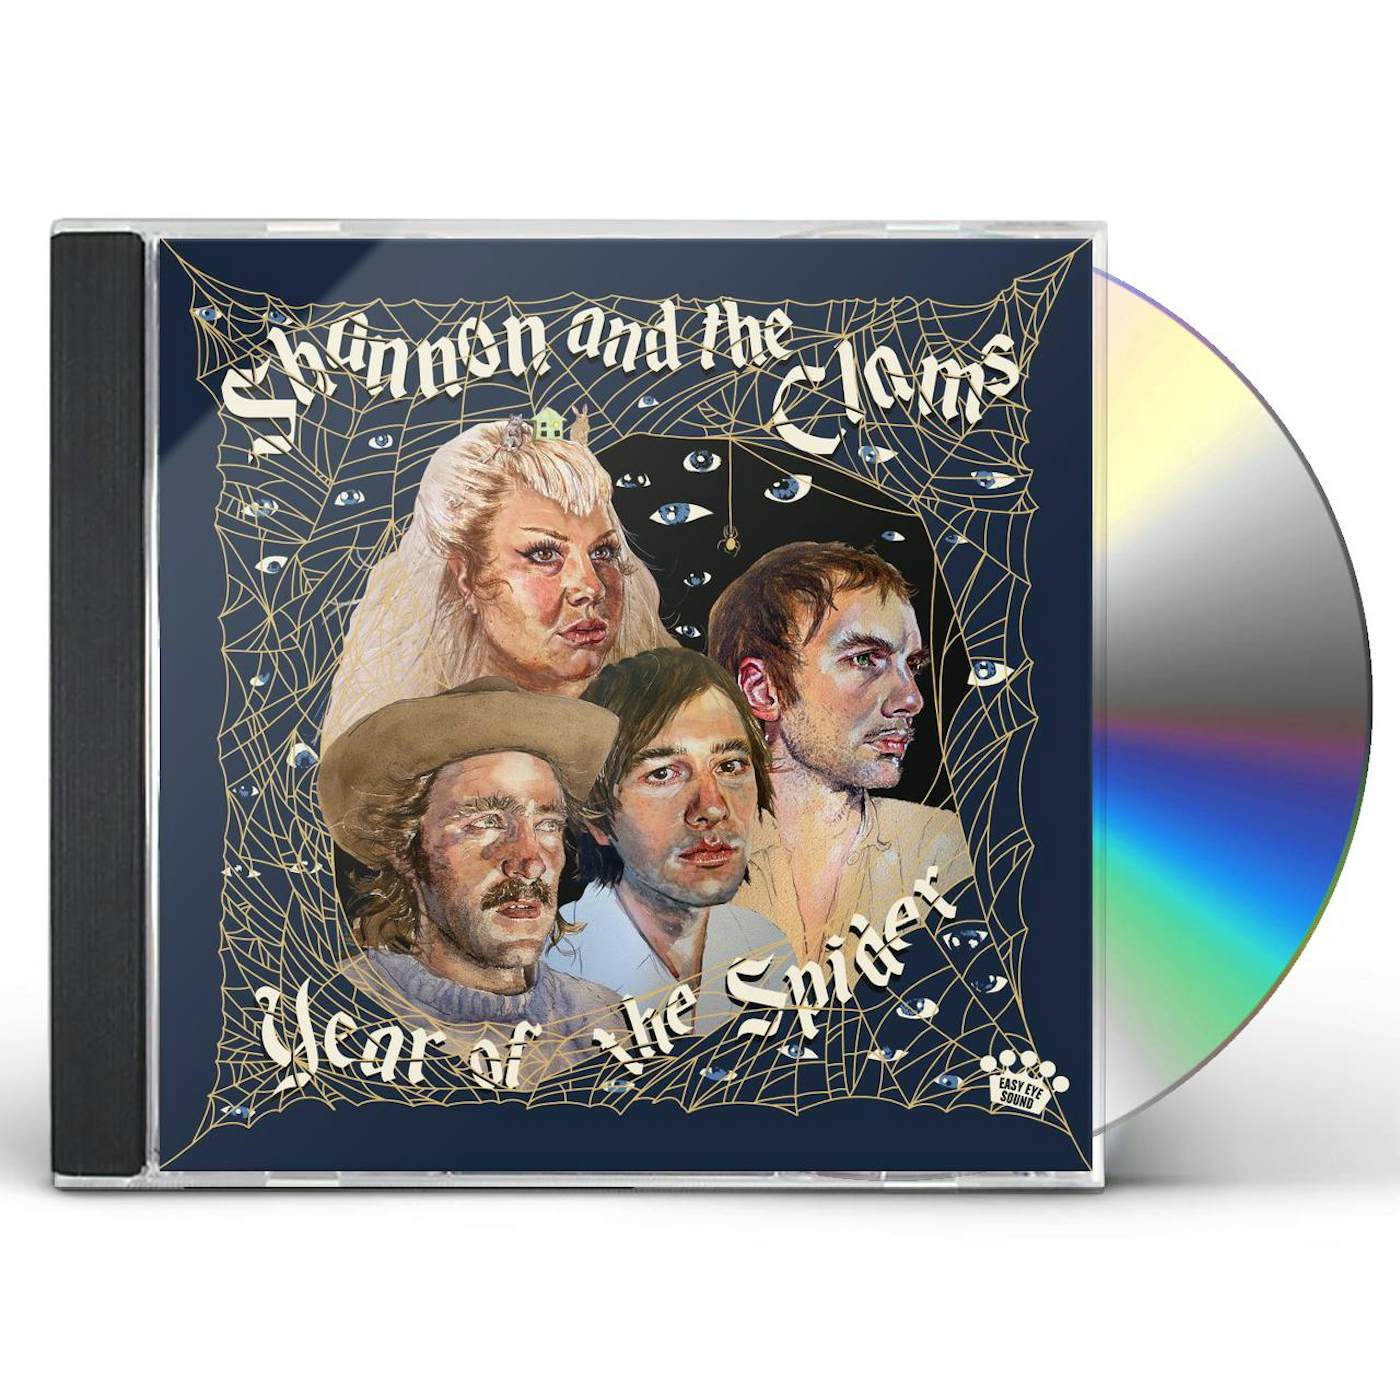 Shannon & The Clams YEAR OF THE SPIDER CD